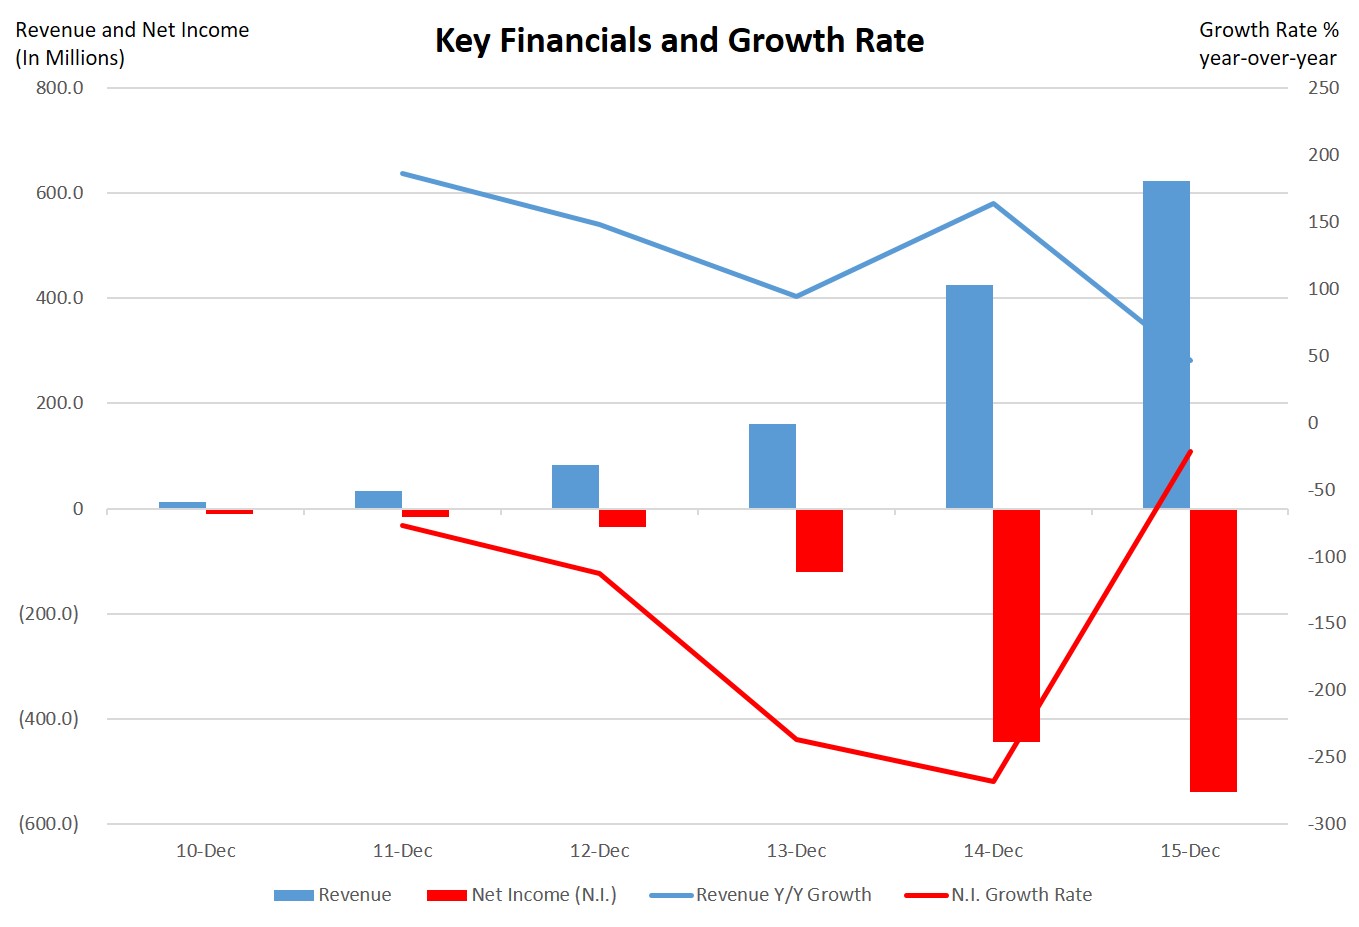 FireEye's Key Financials and Growth Rate